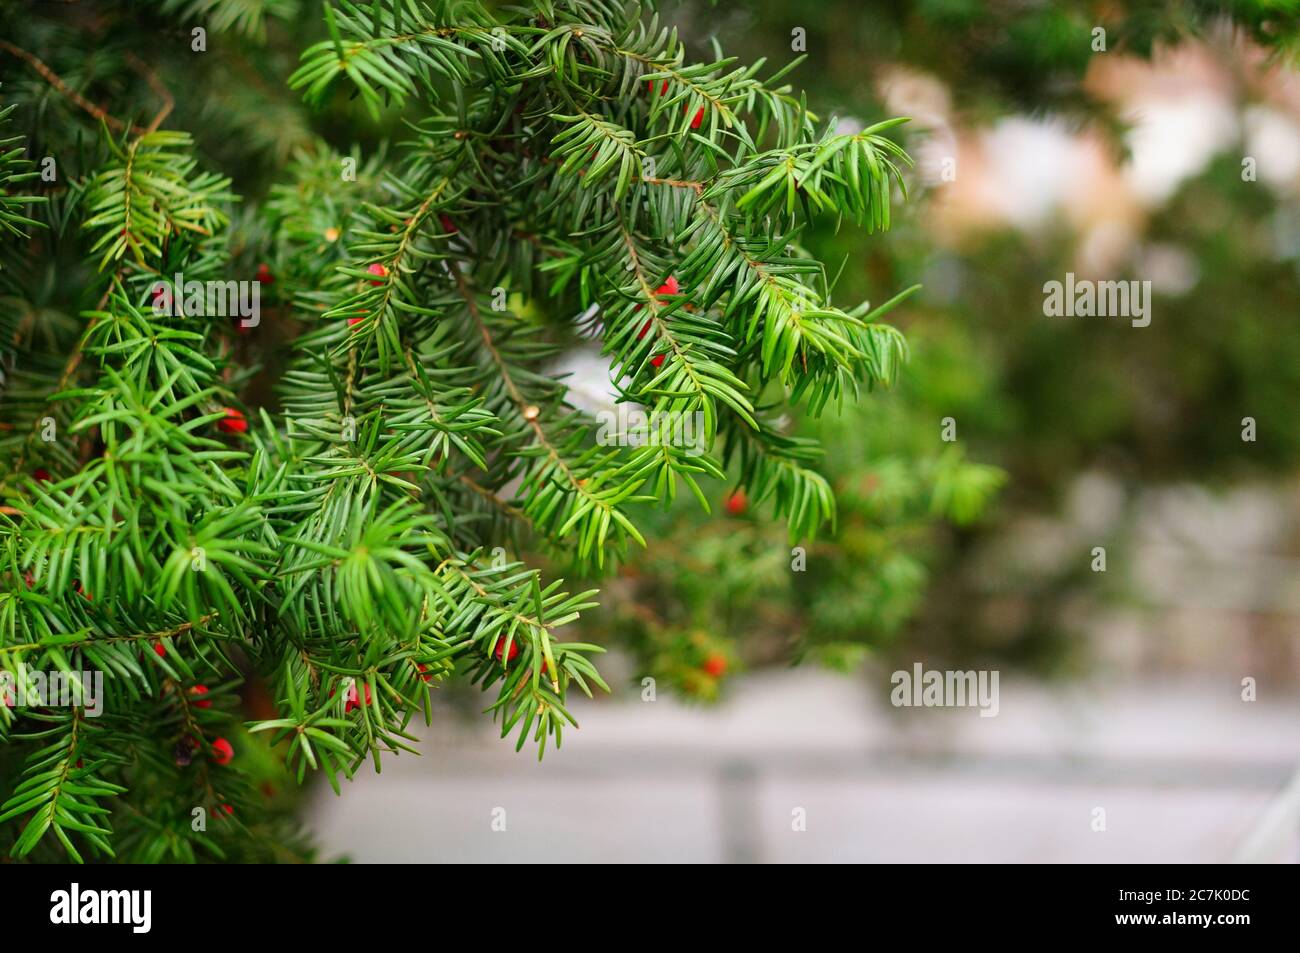 Closeup shot of the leaves of a pinyon tree with red berries with a blurry background Stock Photo